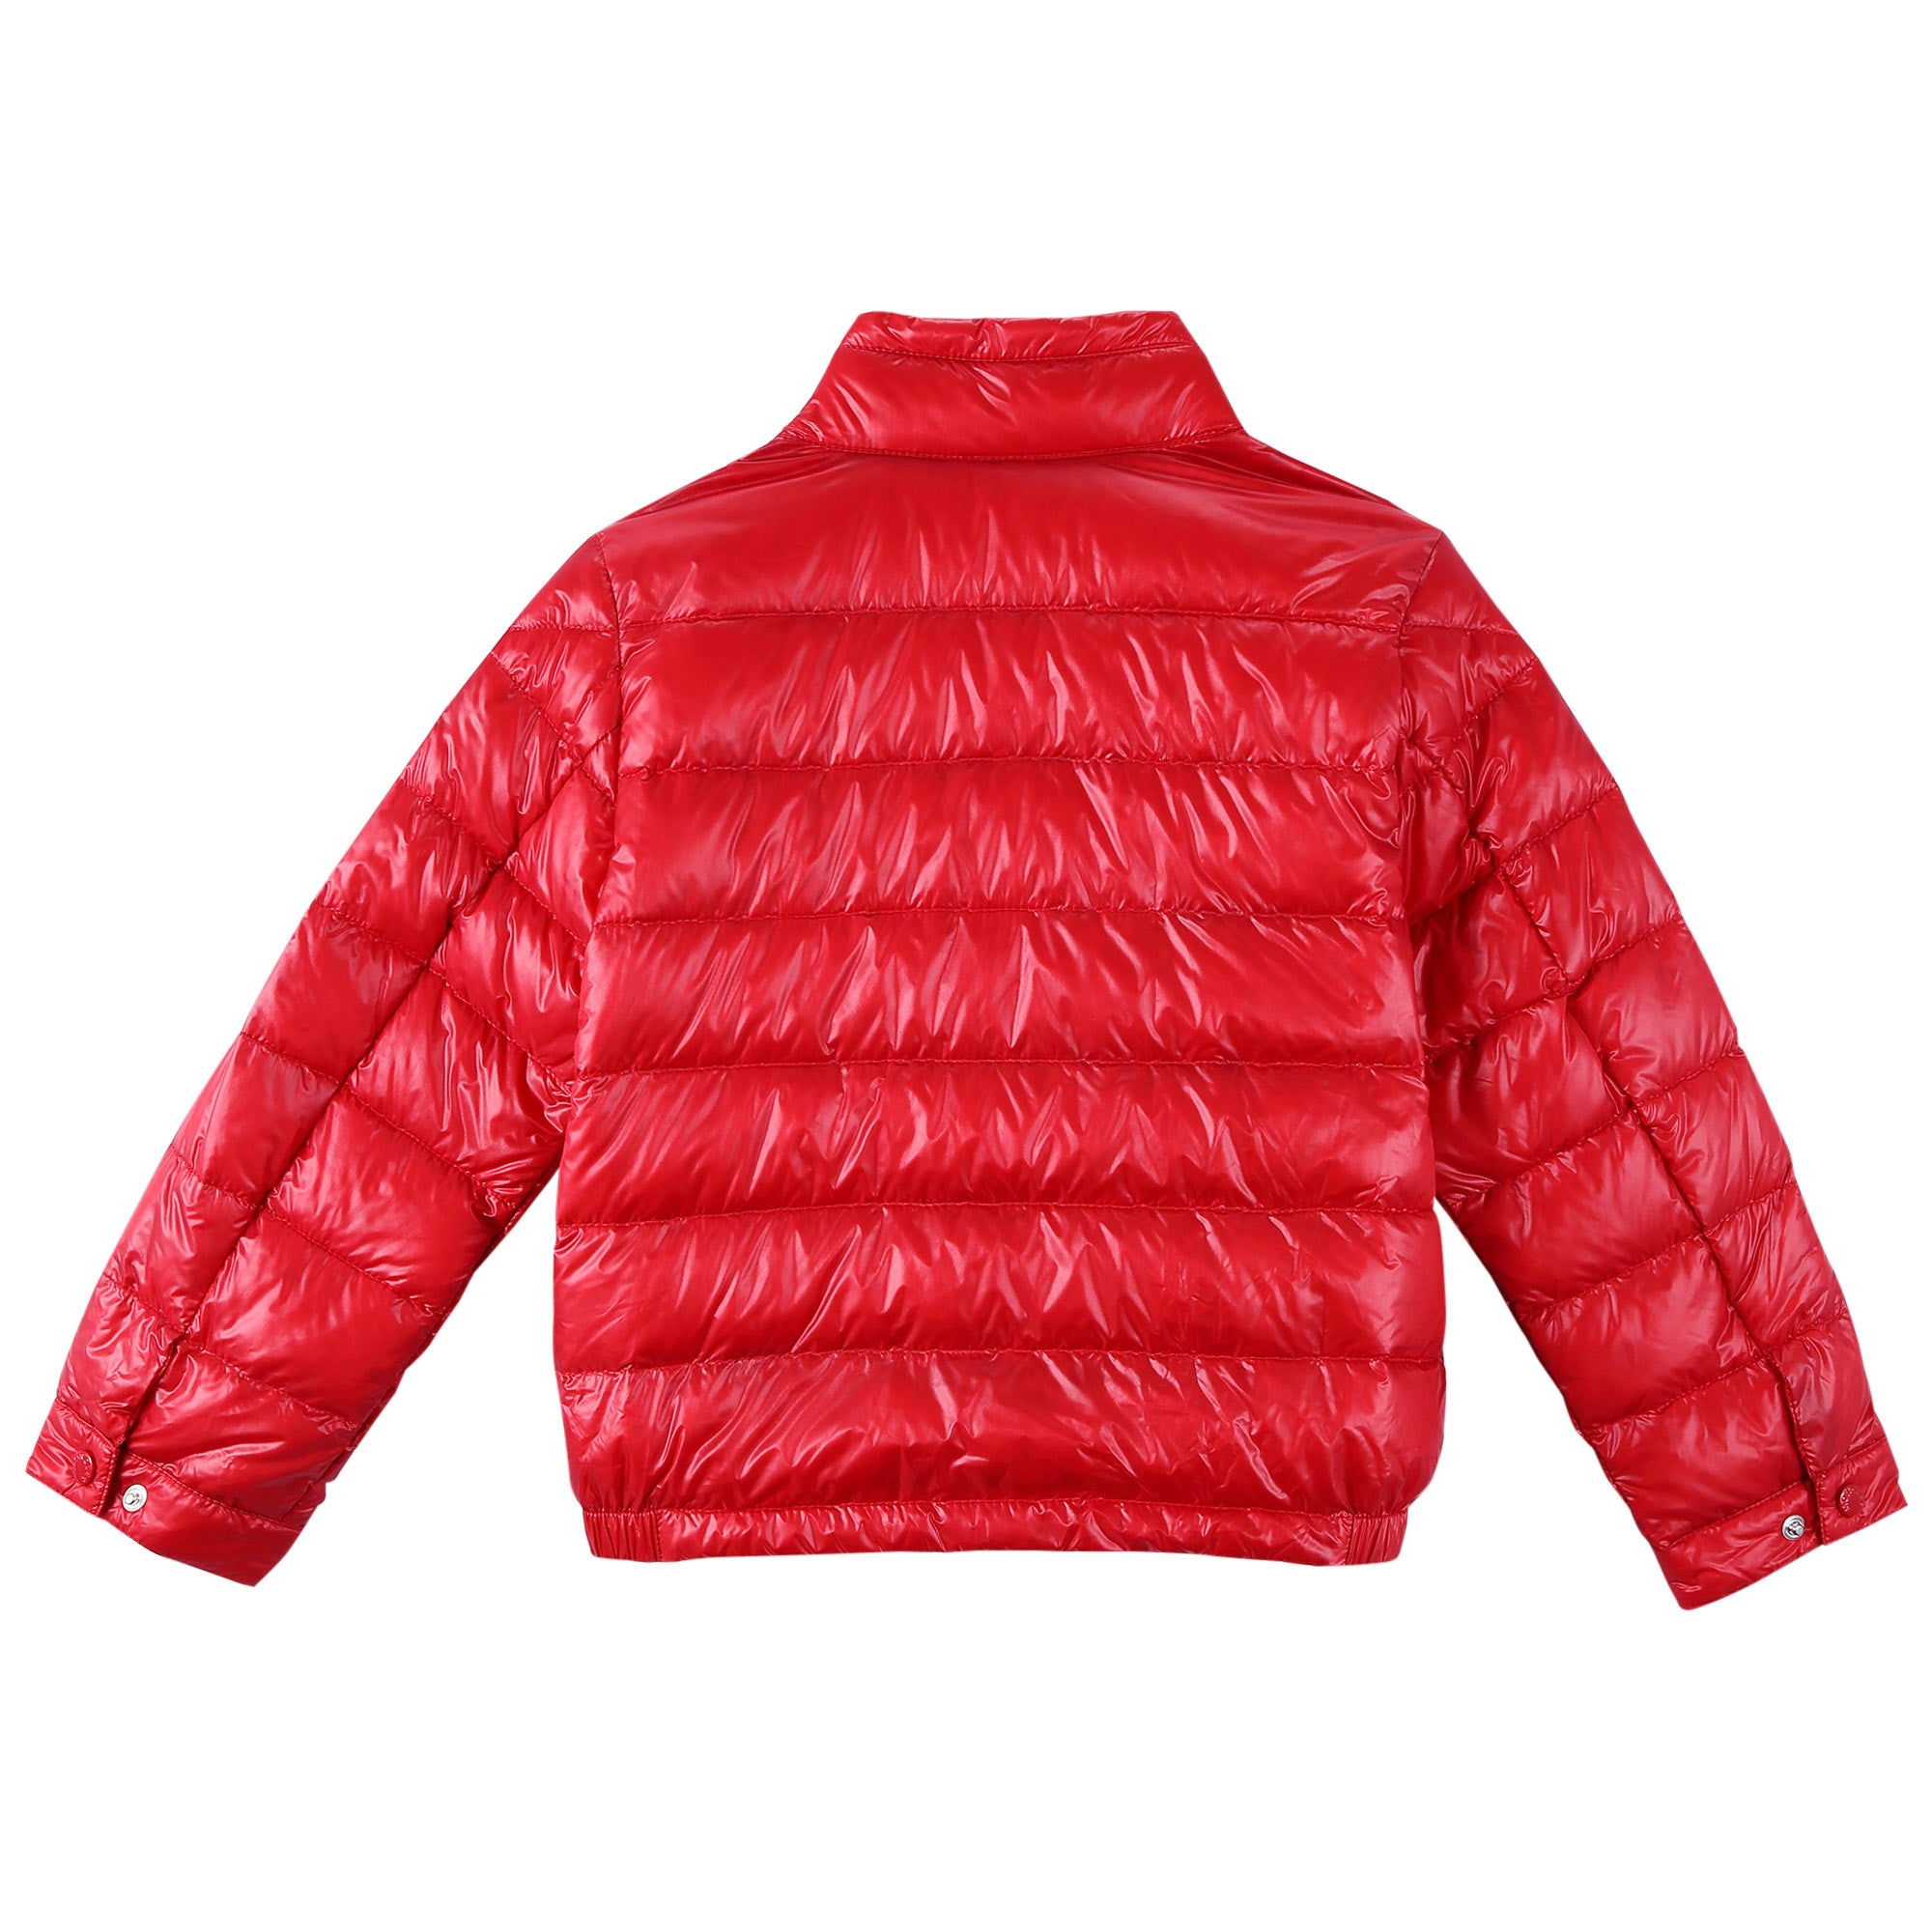 Boys Orange-Red Down Padded 'Acrous' Jacket With Hidden Pocket - CÉMAROSE | Children's Fashion Store - 2